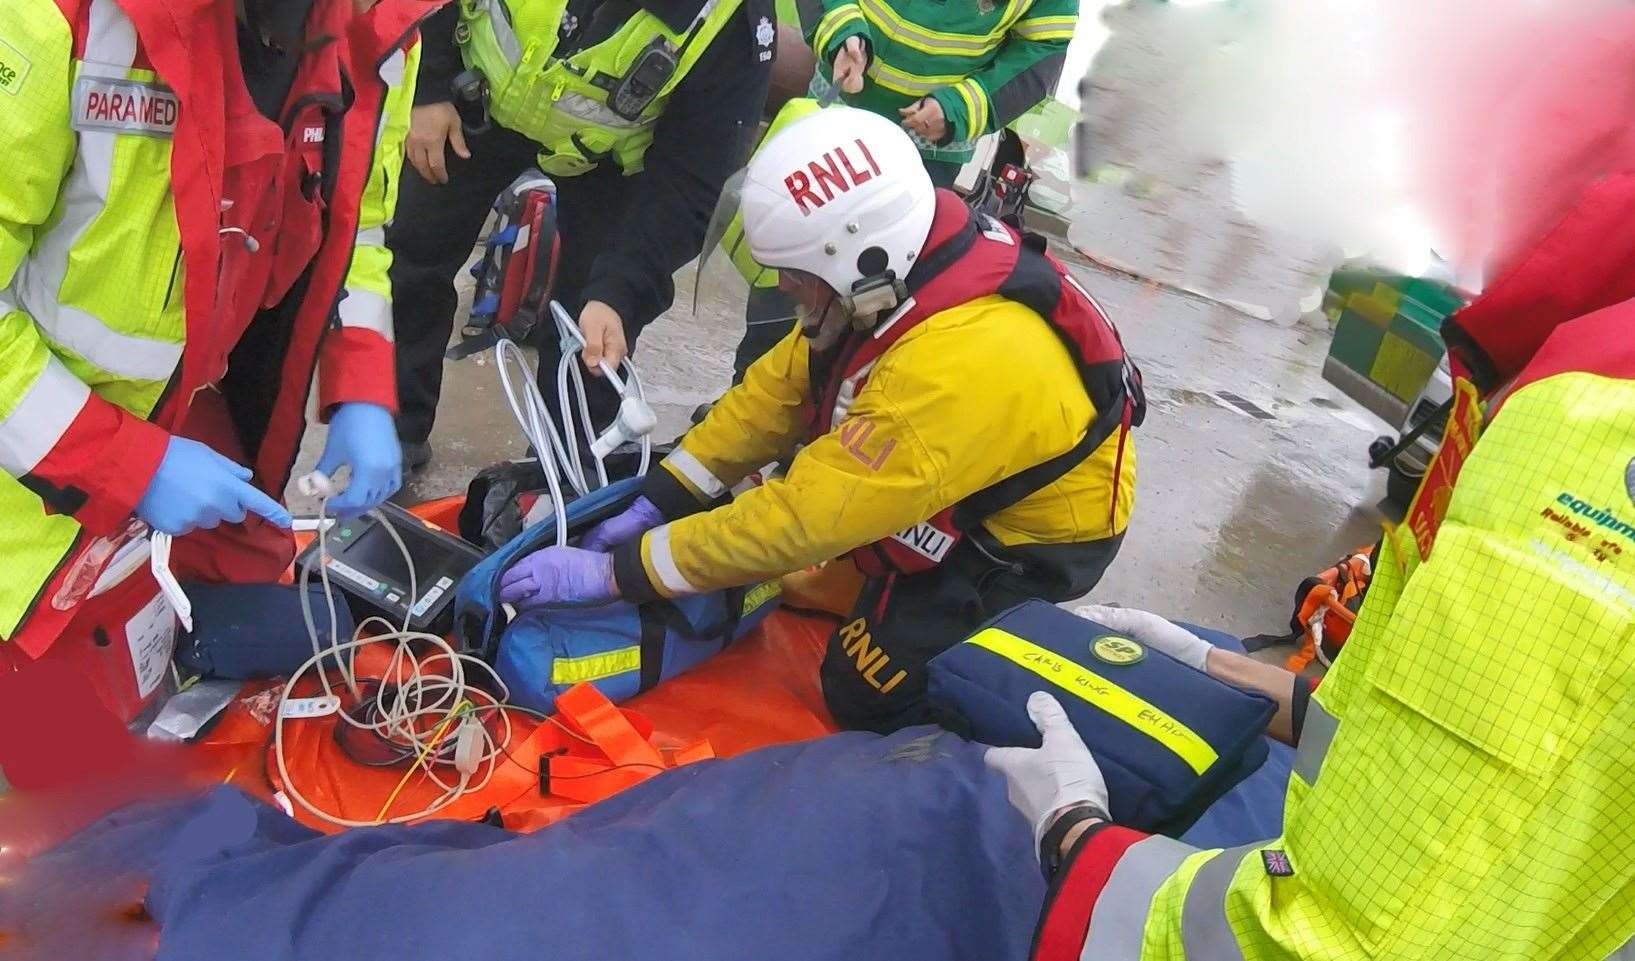 Gravesend lifeboat crews giving casualty care alongside paramedics